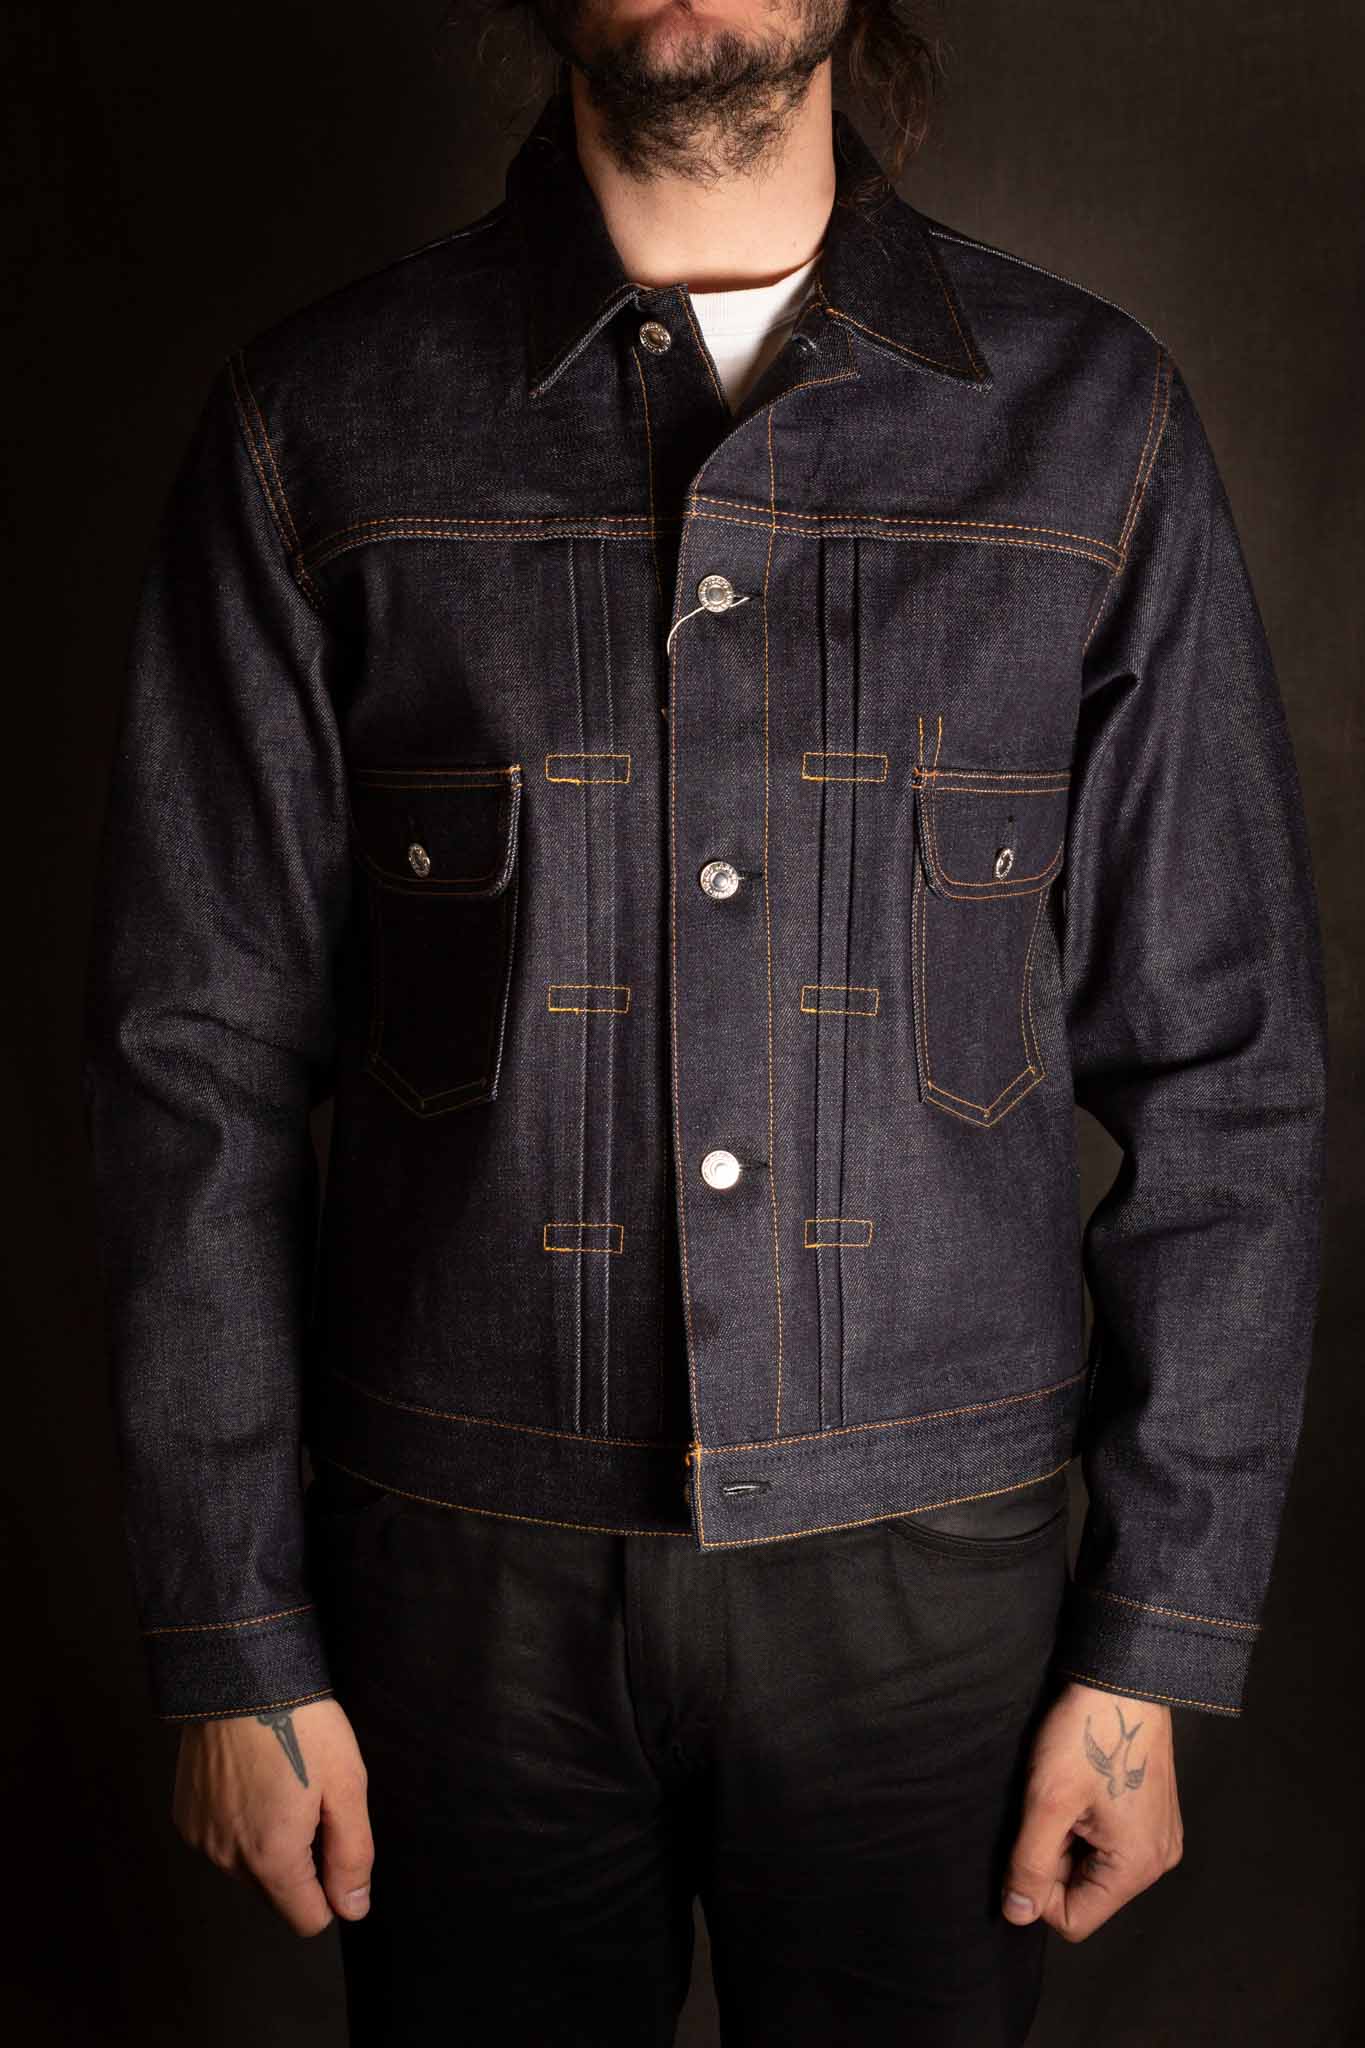 LEVI´S Men Type 3 Sherpa Trucker Fable Sh - 139.99 €. Buy Denim Jackets  from LEVI´S Men online at Boozt.com. Fast delivery and easy returns